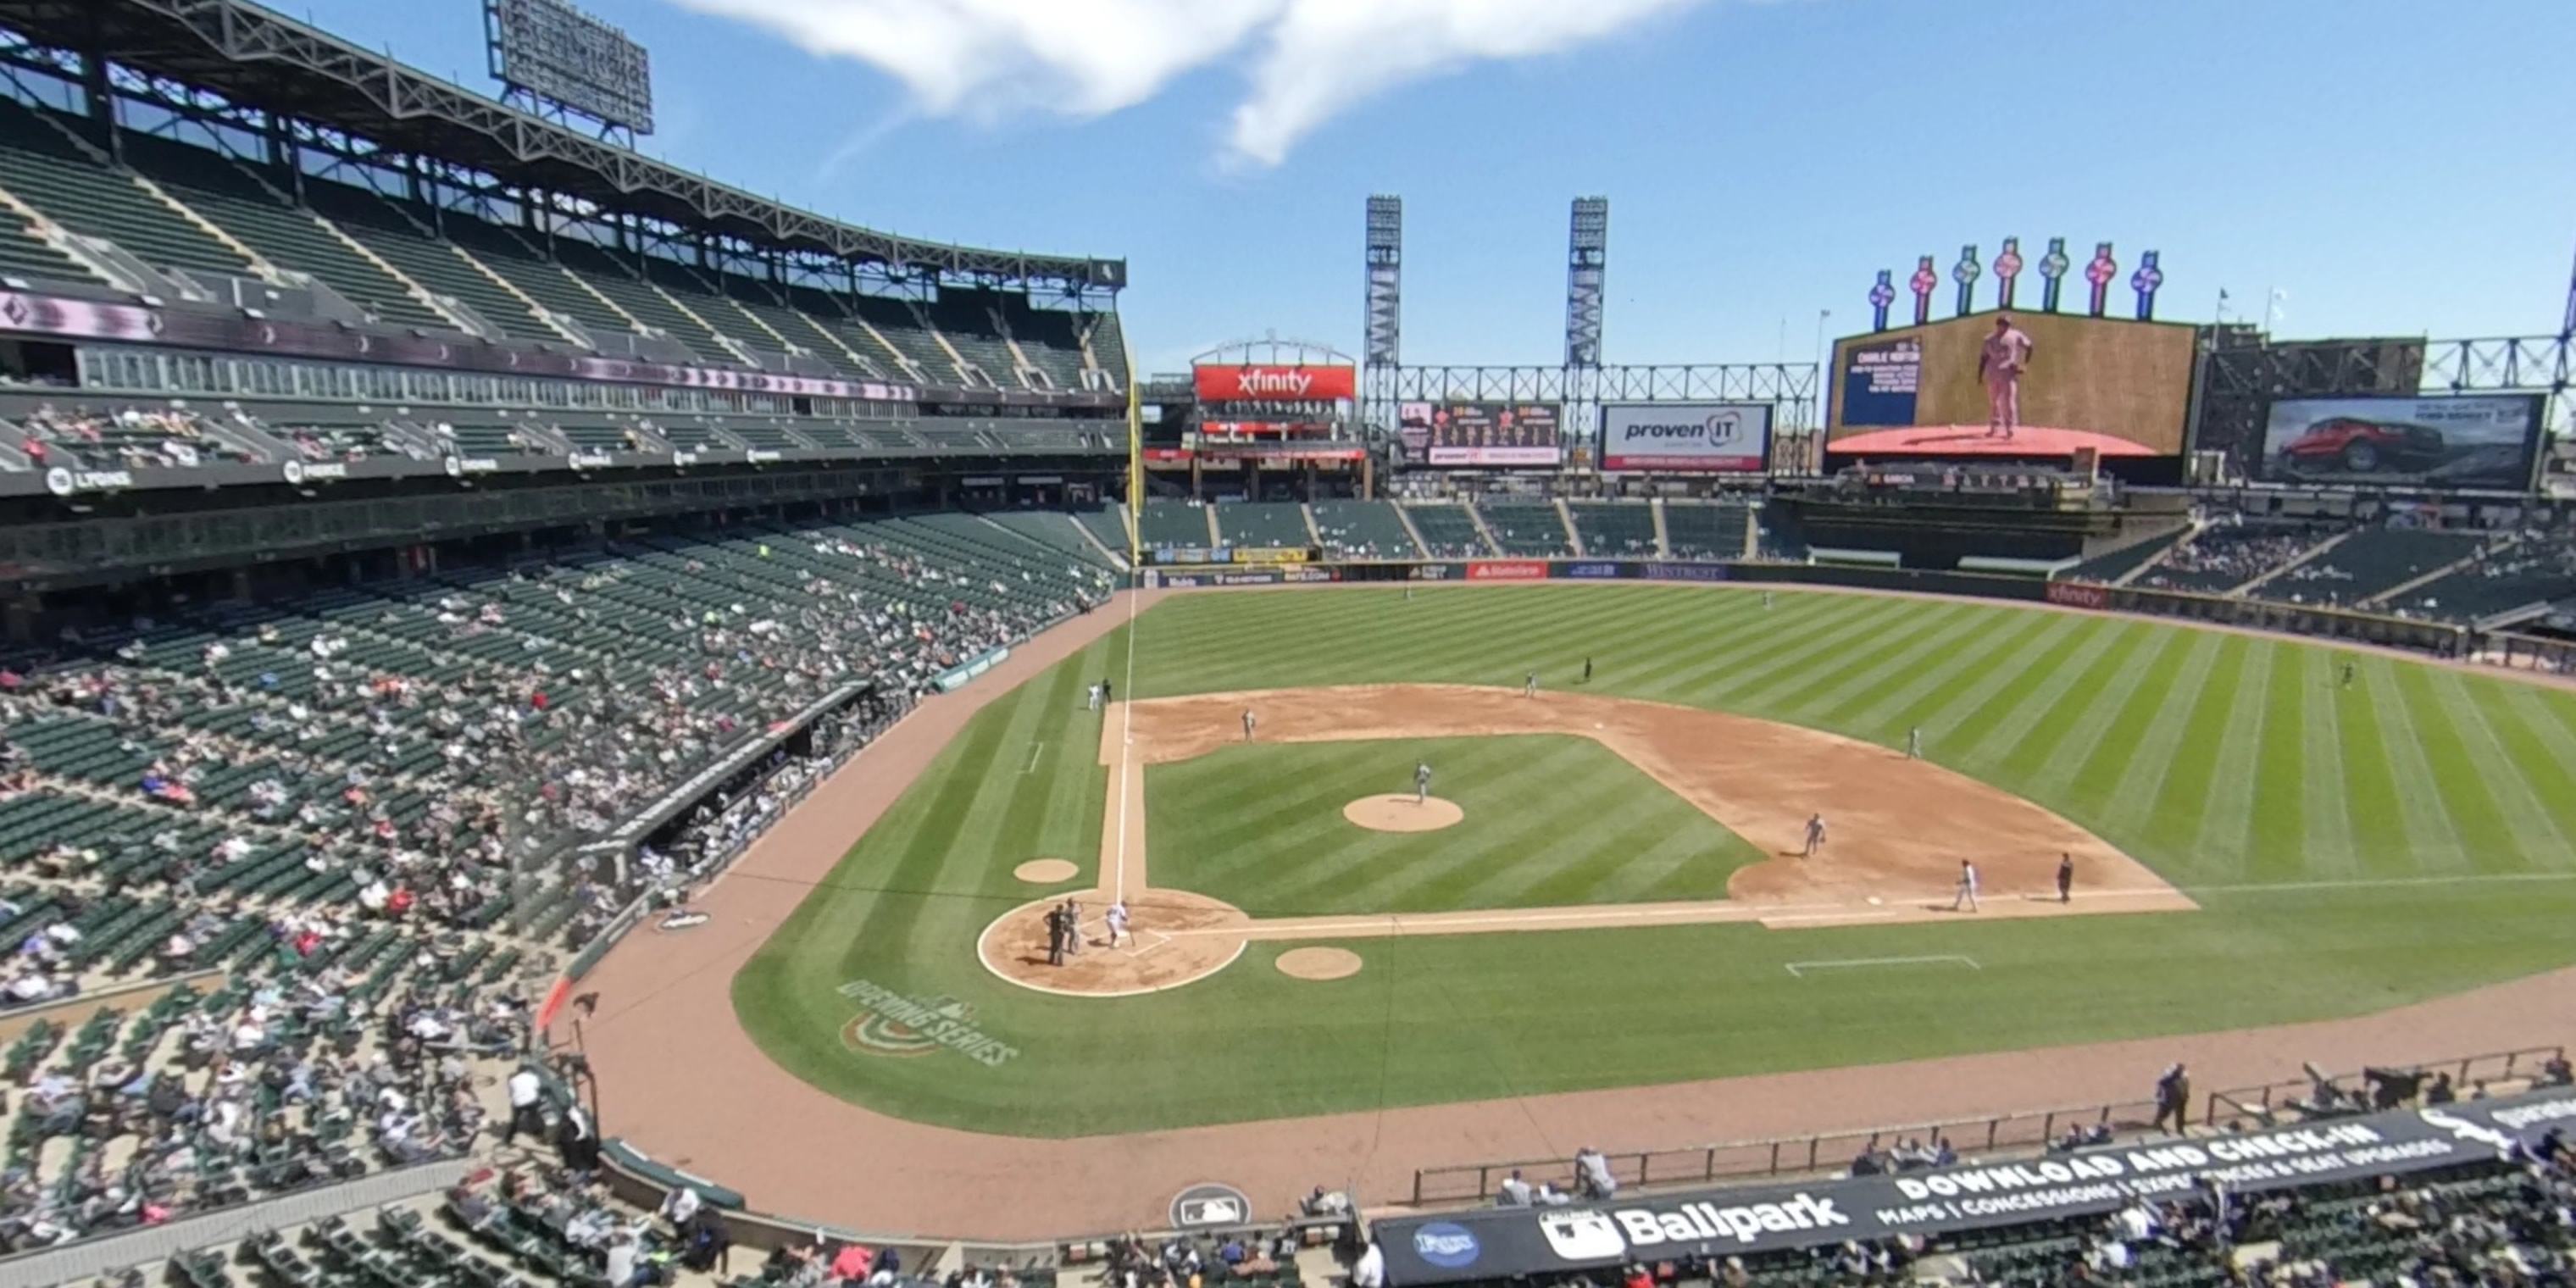 section 328 panoramic seat view  - guaranteed rate field